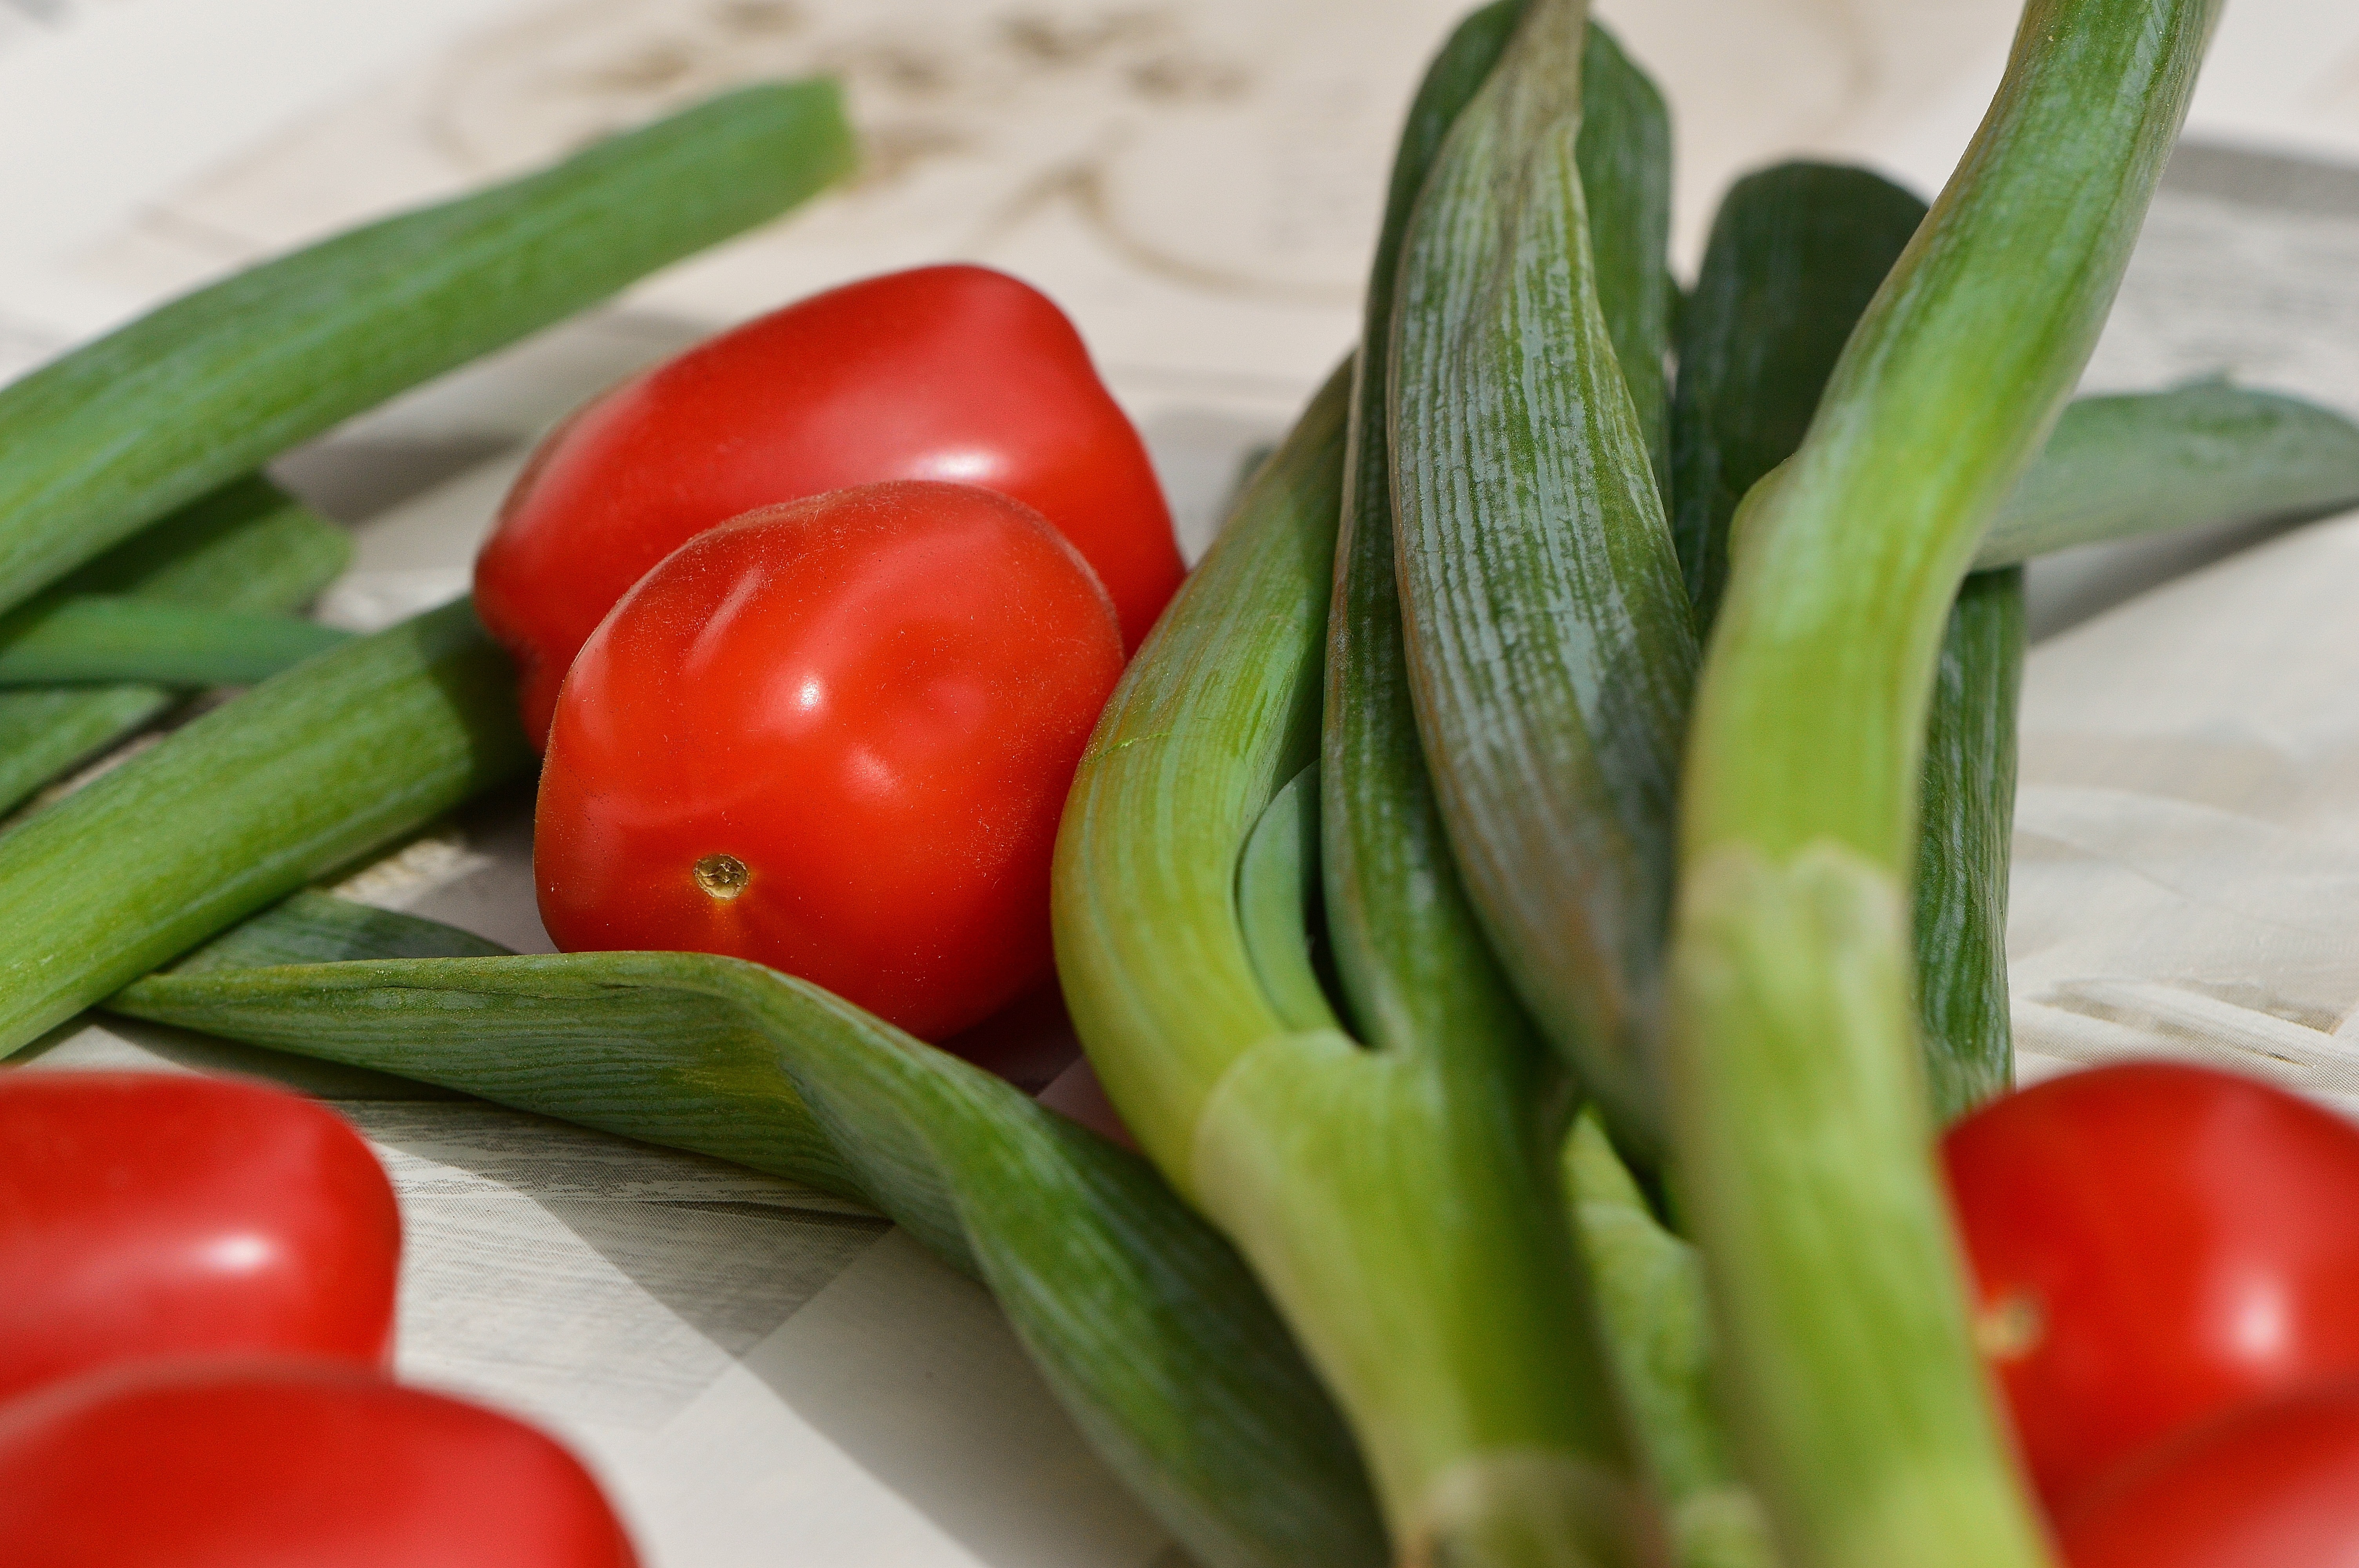 Spring Onions, Tomatoes, Vegetables, vegetable, food and drink